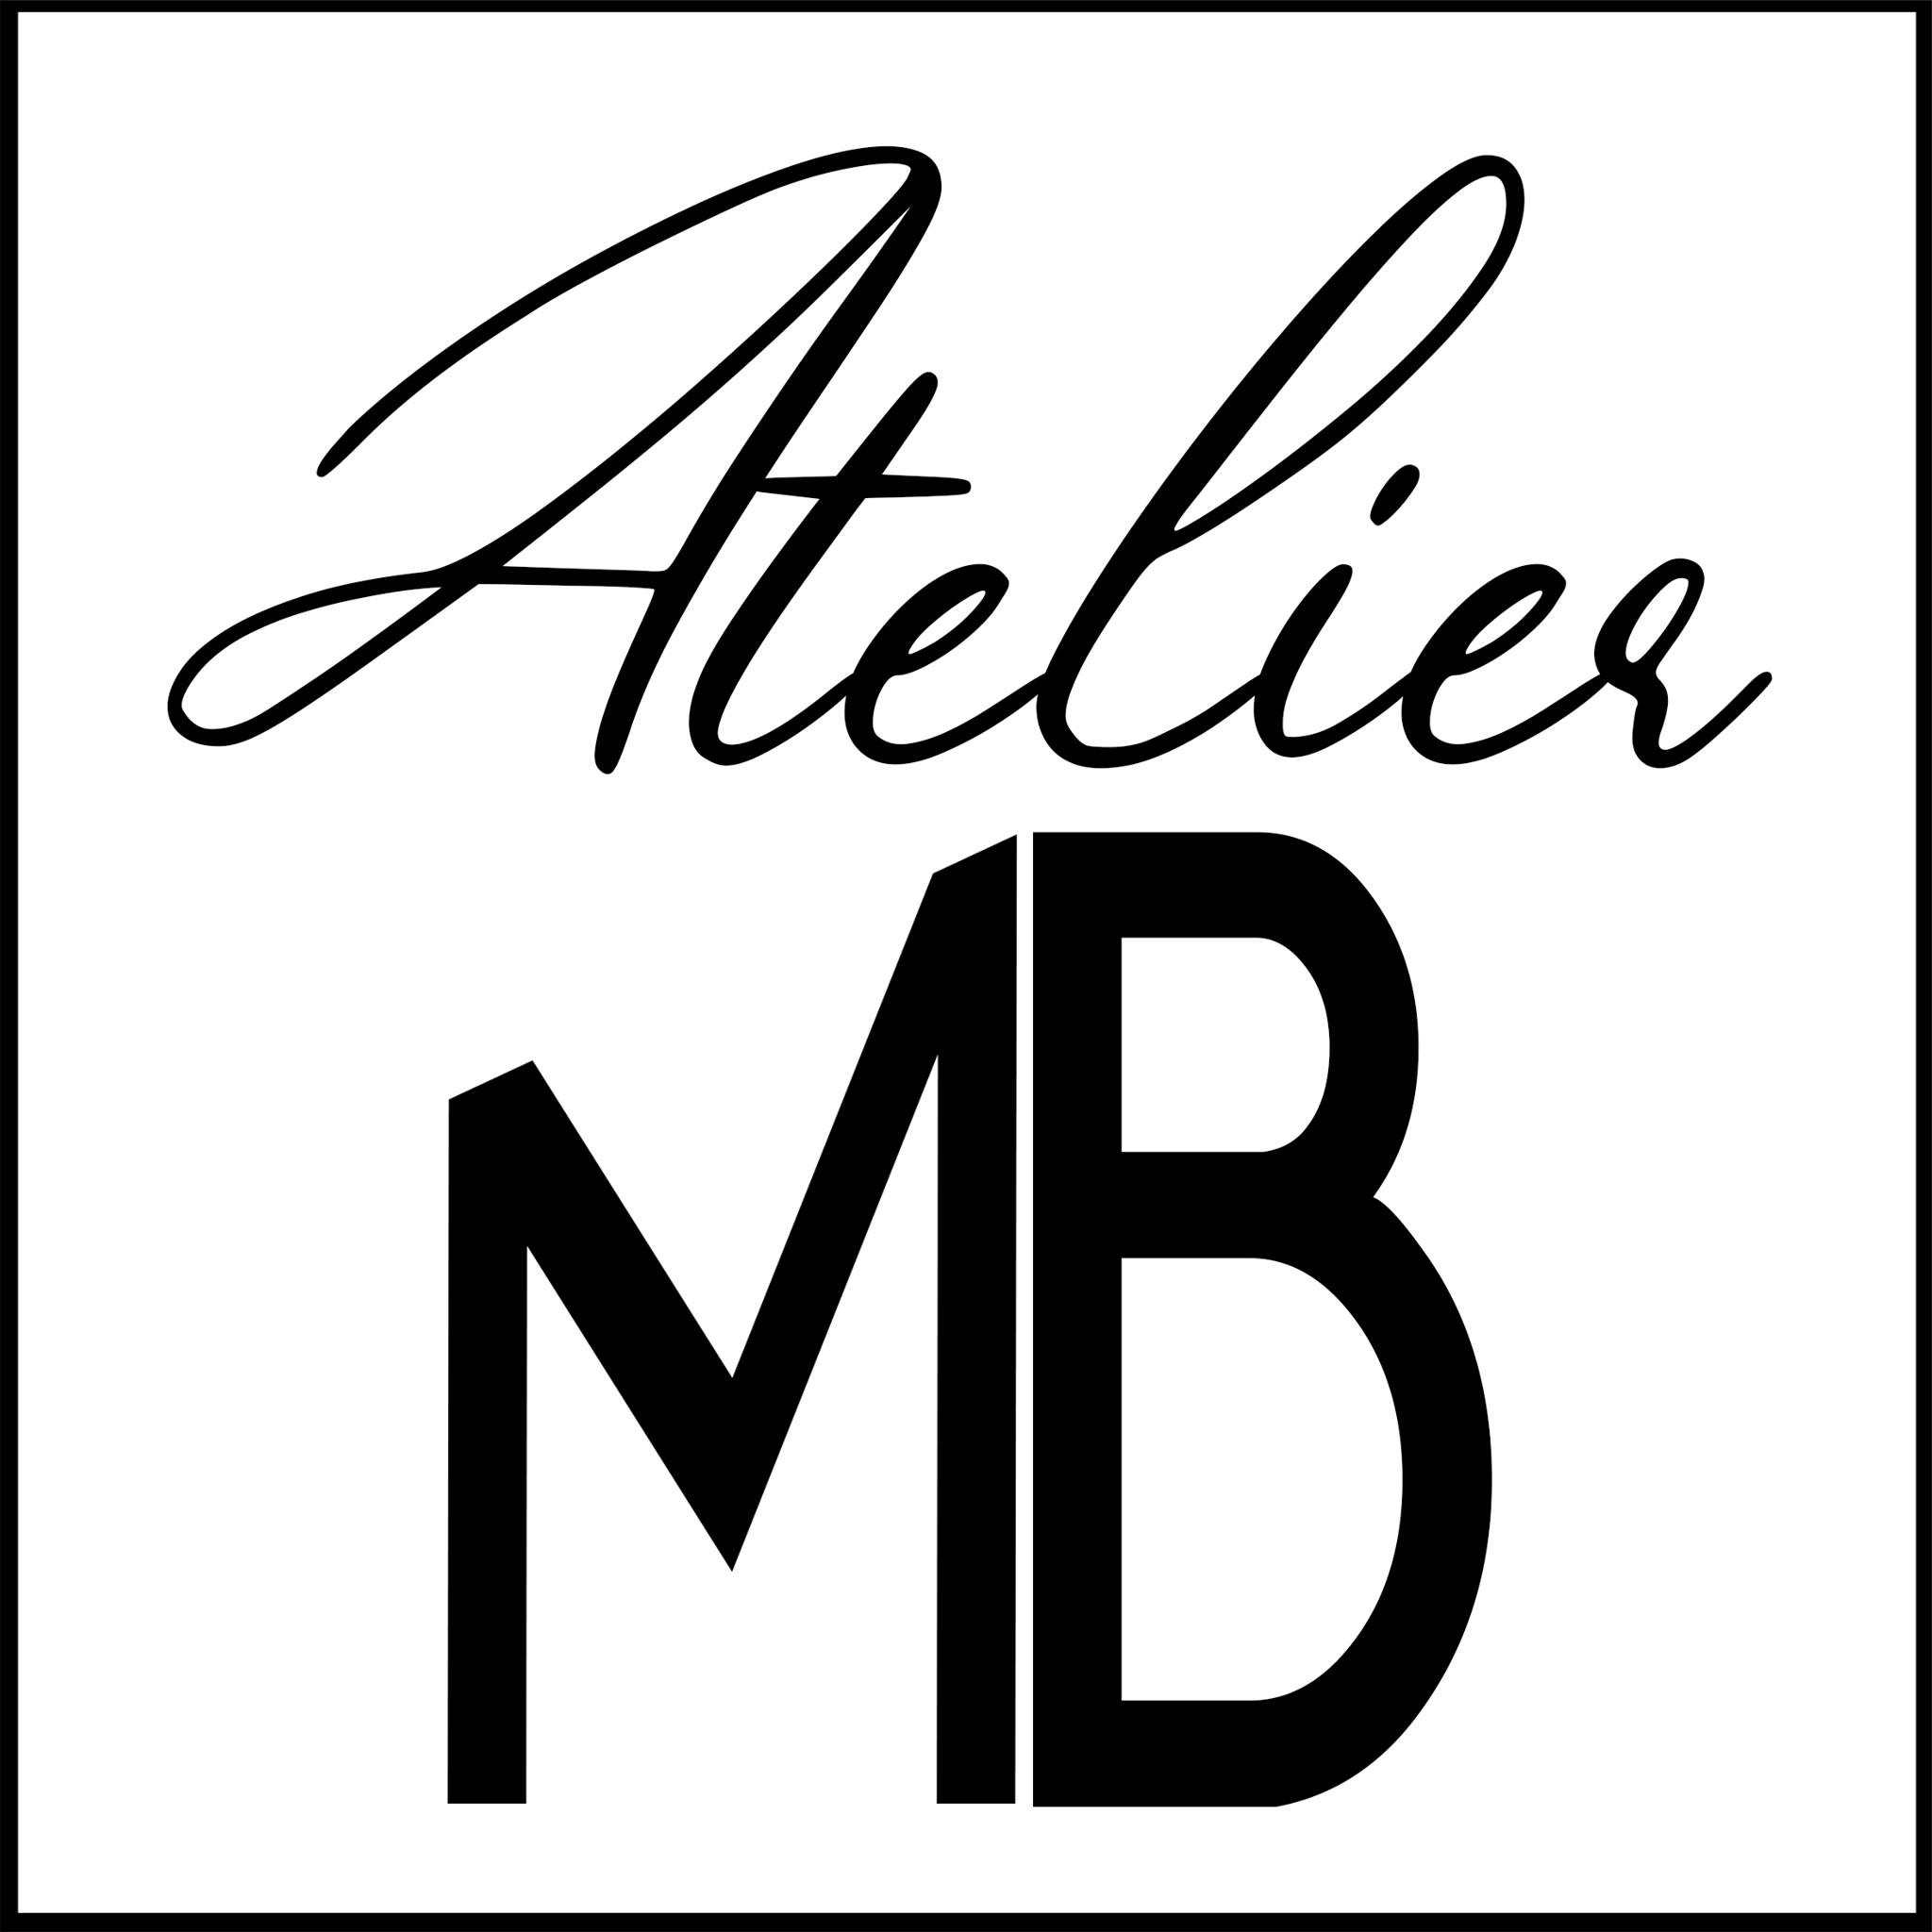 Click and Collect - Atelier MB